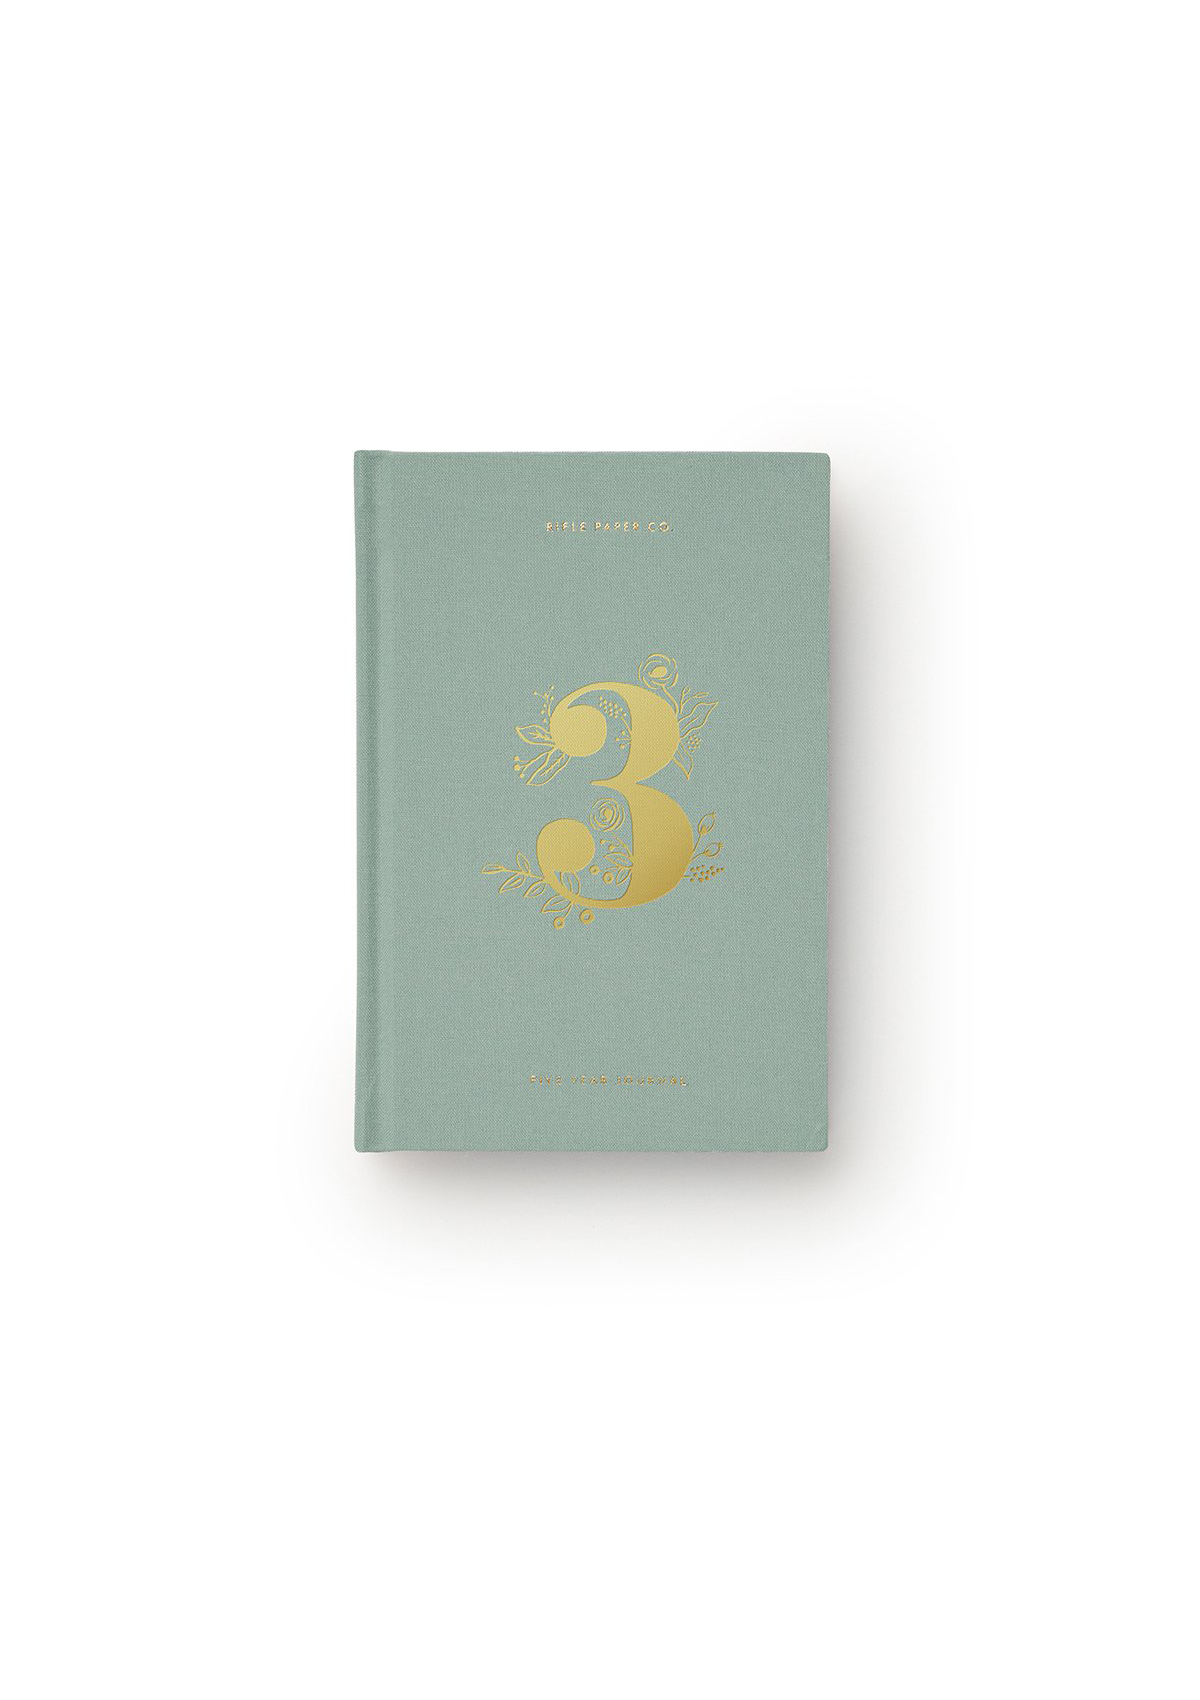 Five Year Keepsake Journal Set, a simple and elegant way to create a lifelong keepsake. Five years of memories with our boxed set of hardcover journals.